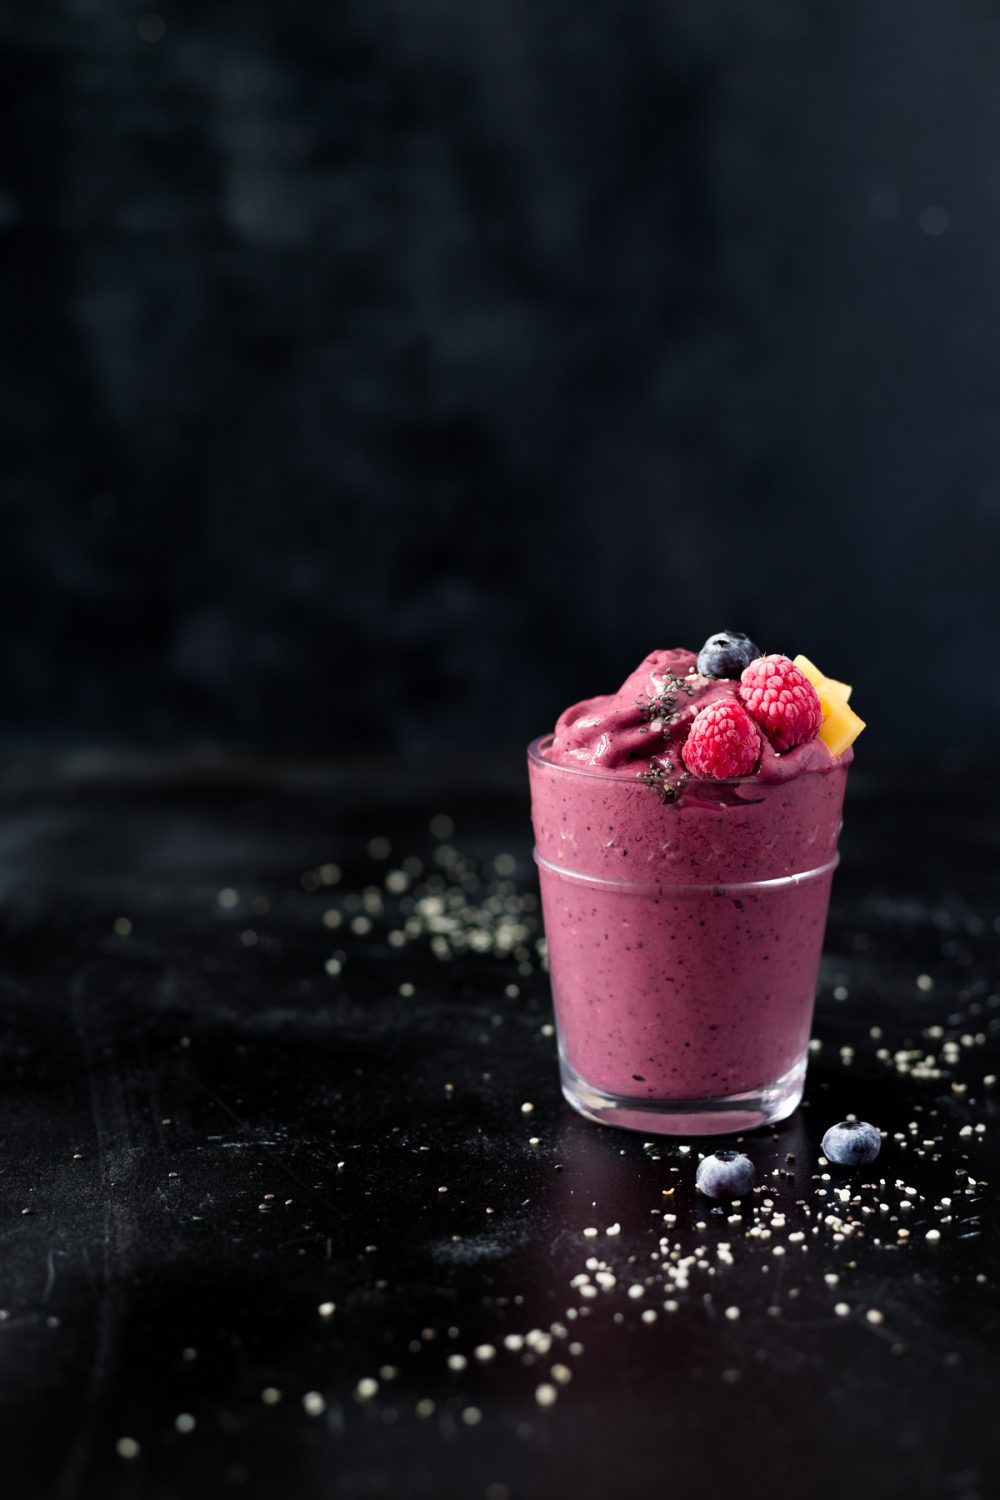 glass with mango berry tropical smoothie topped with fresh frozen berries, mango, hemp hearts and chia seeds